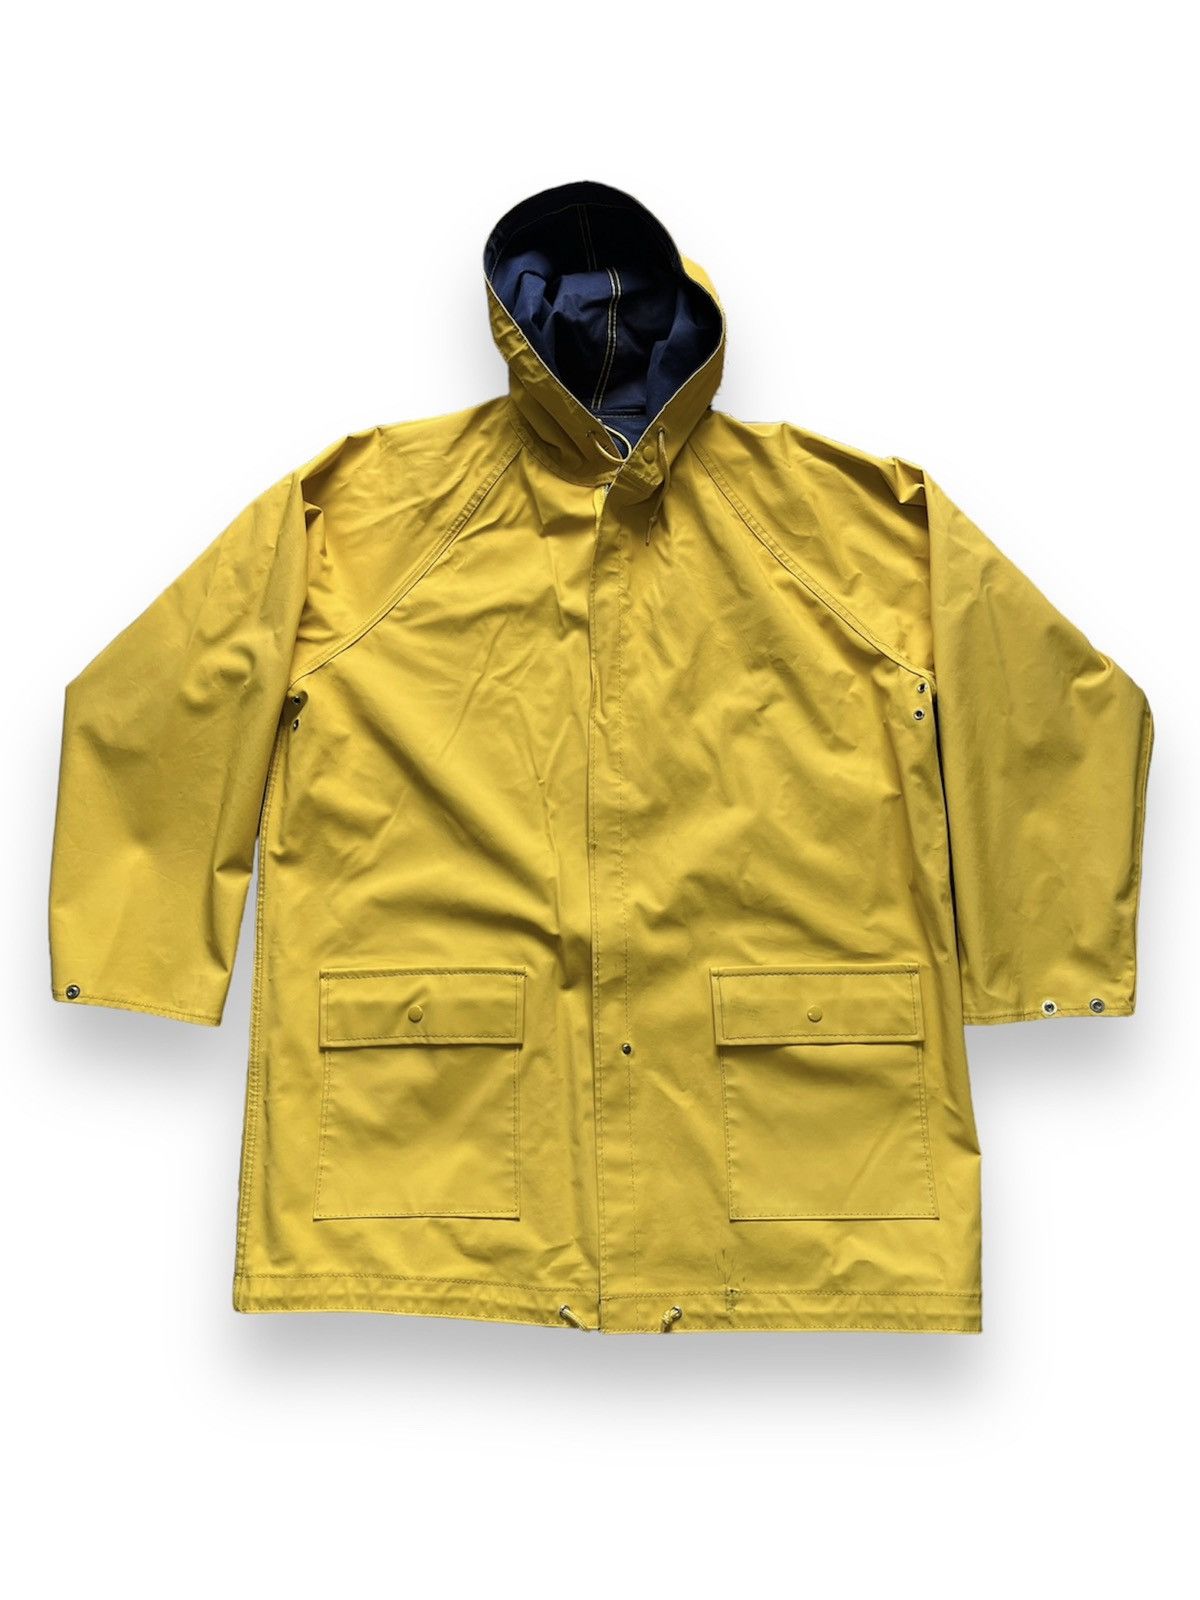 Outdoor Style Go Out! - Scene Reversible USA Parka Waterproof Jacket - 5